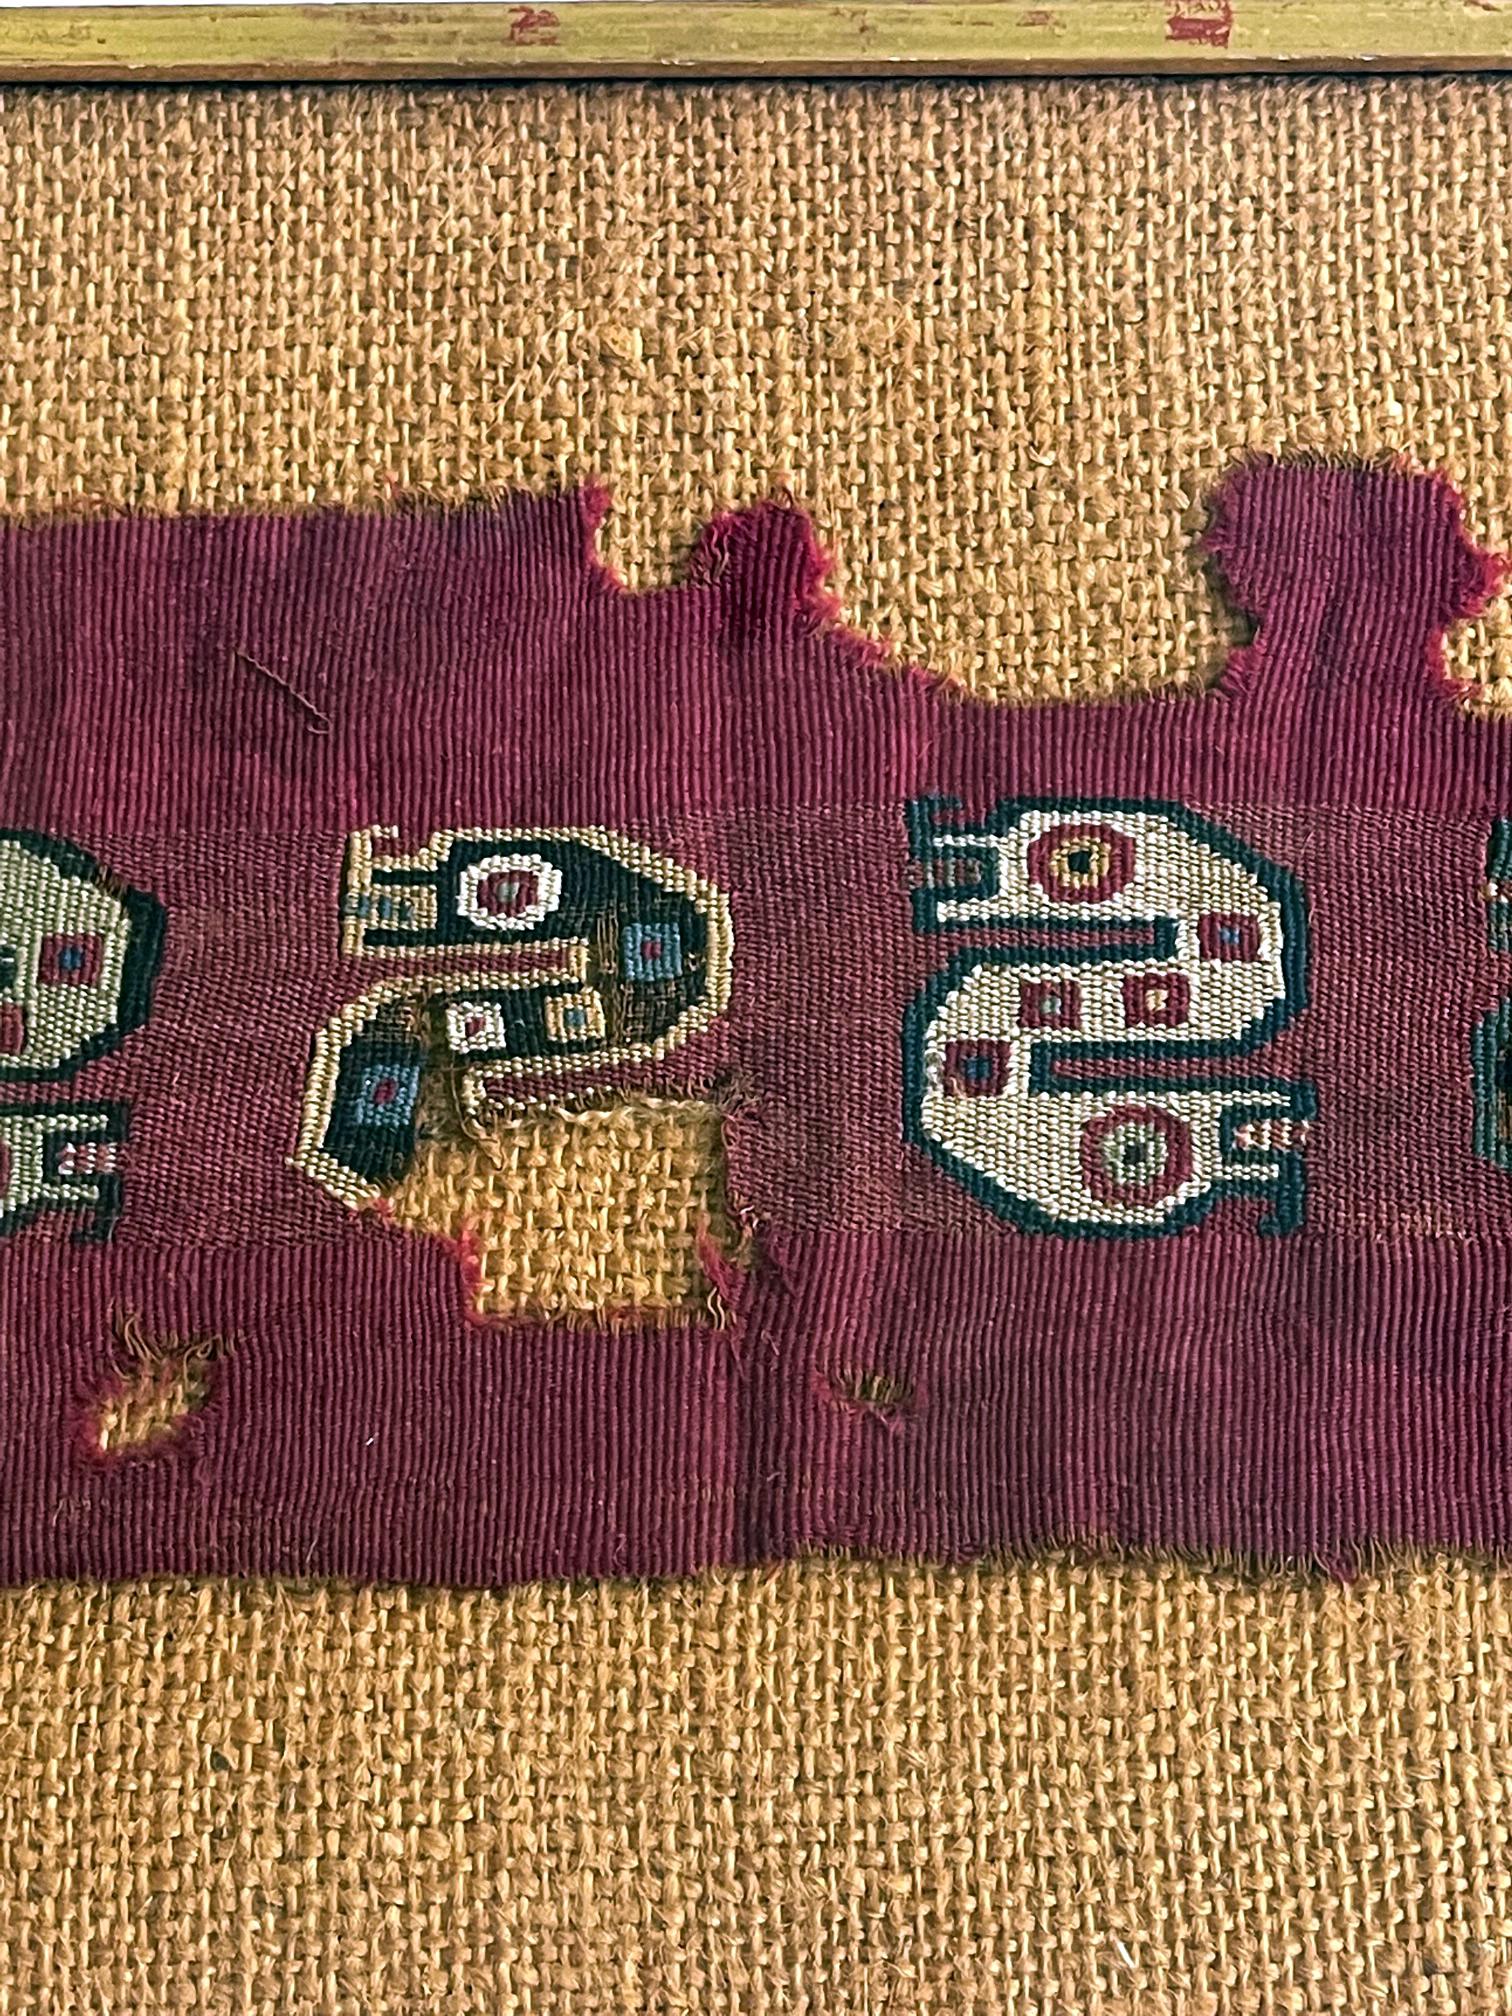 Two Framed Pre-Columbian Textile Fragment Chancay Culture Peru In Good Condition For Sale In Atlanta, GA